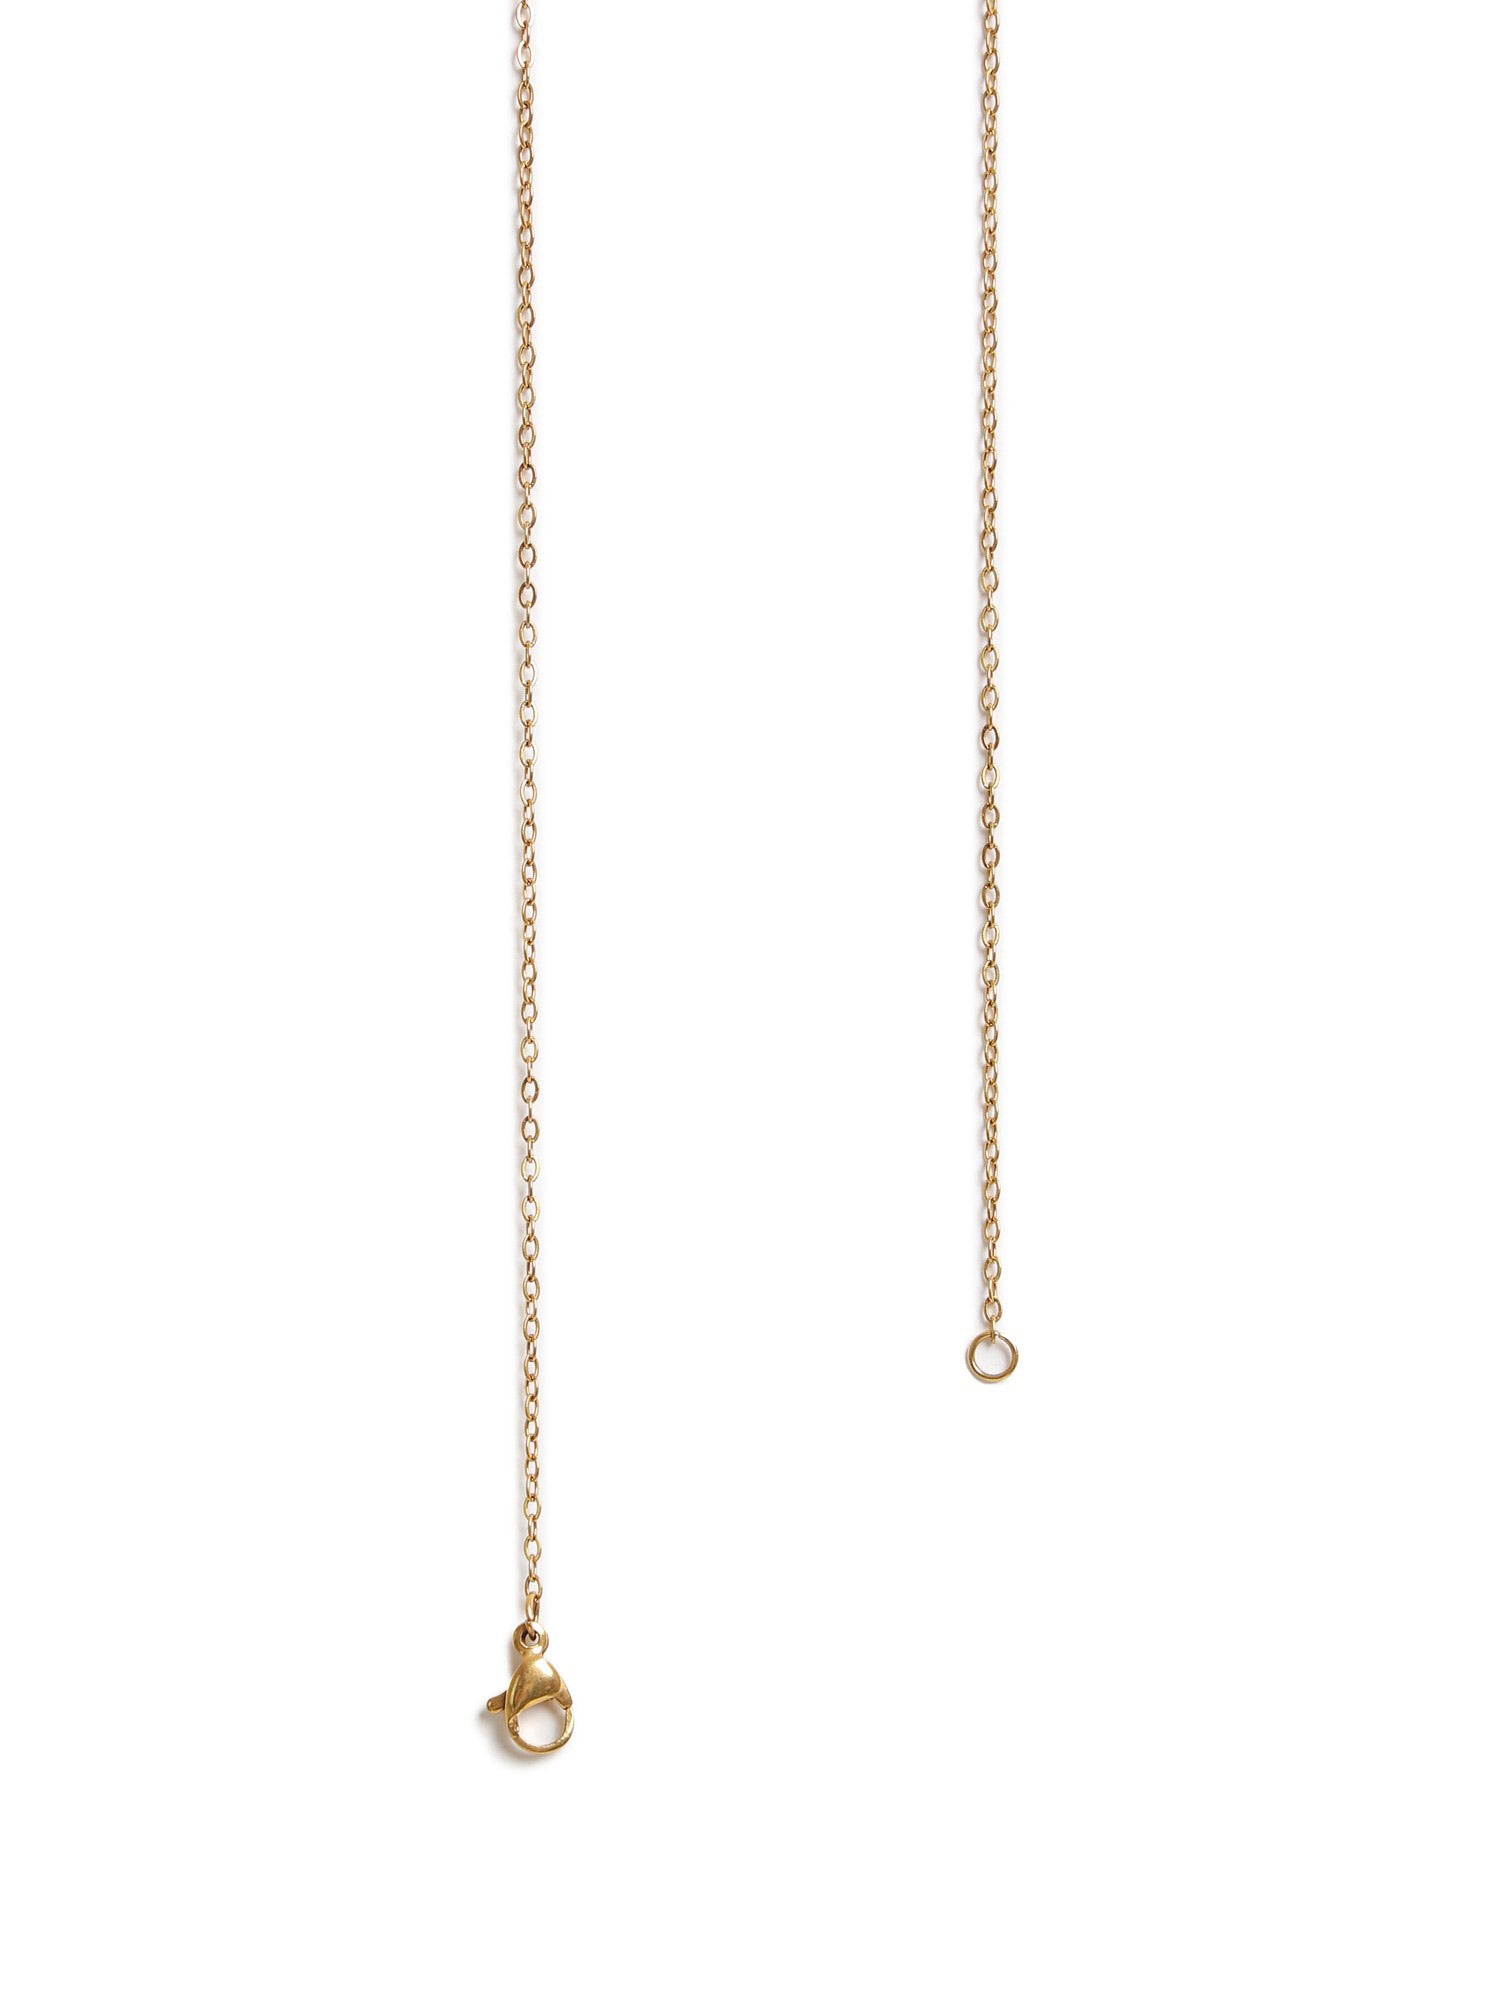 Charmz Gold-Tone Stainless Steel Brass Dangle Necklace